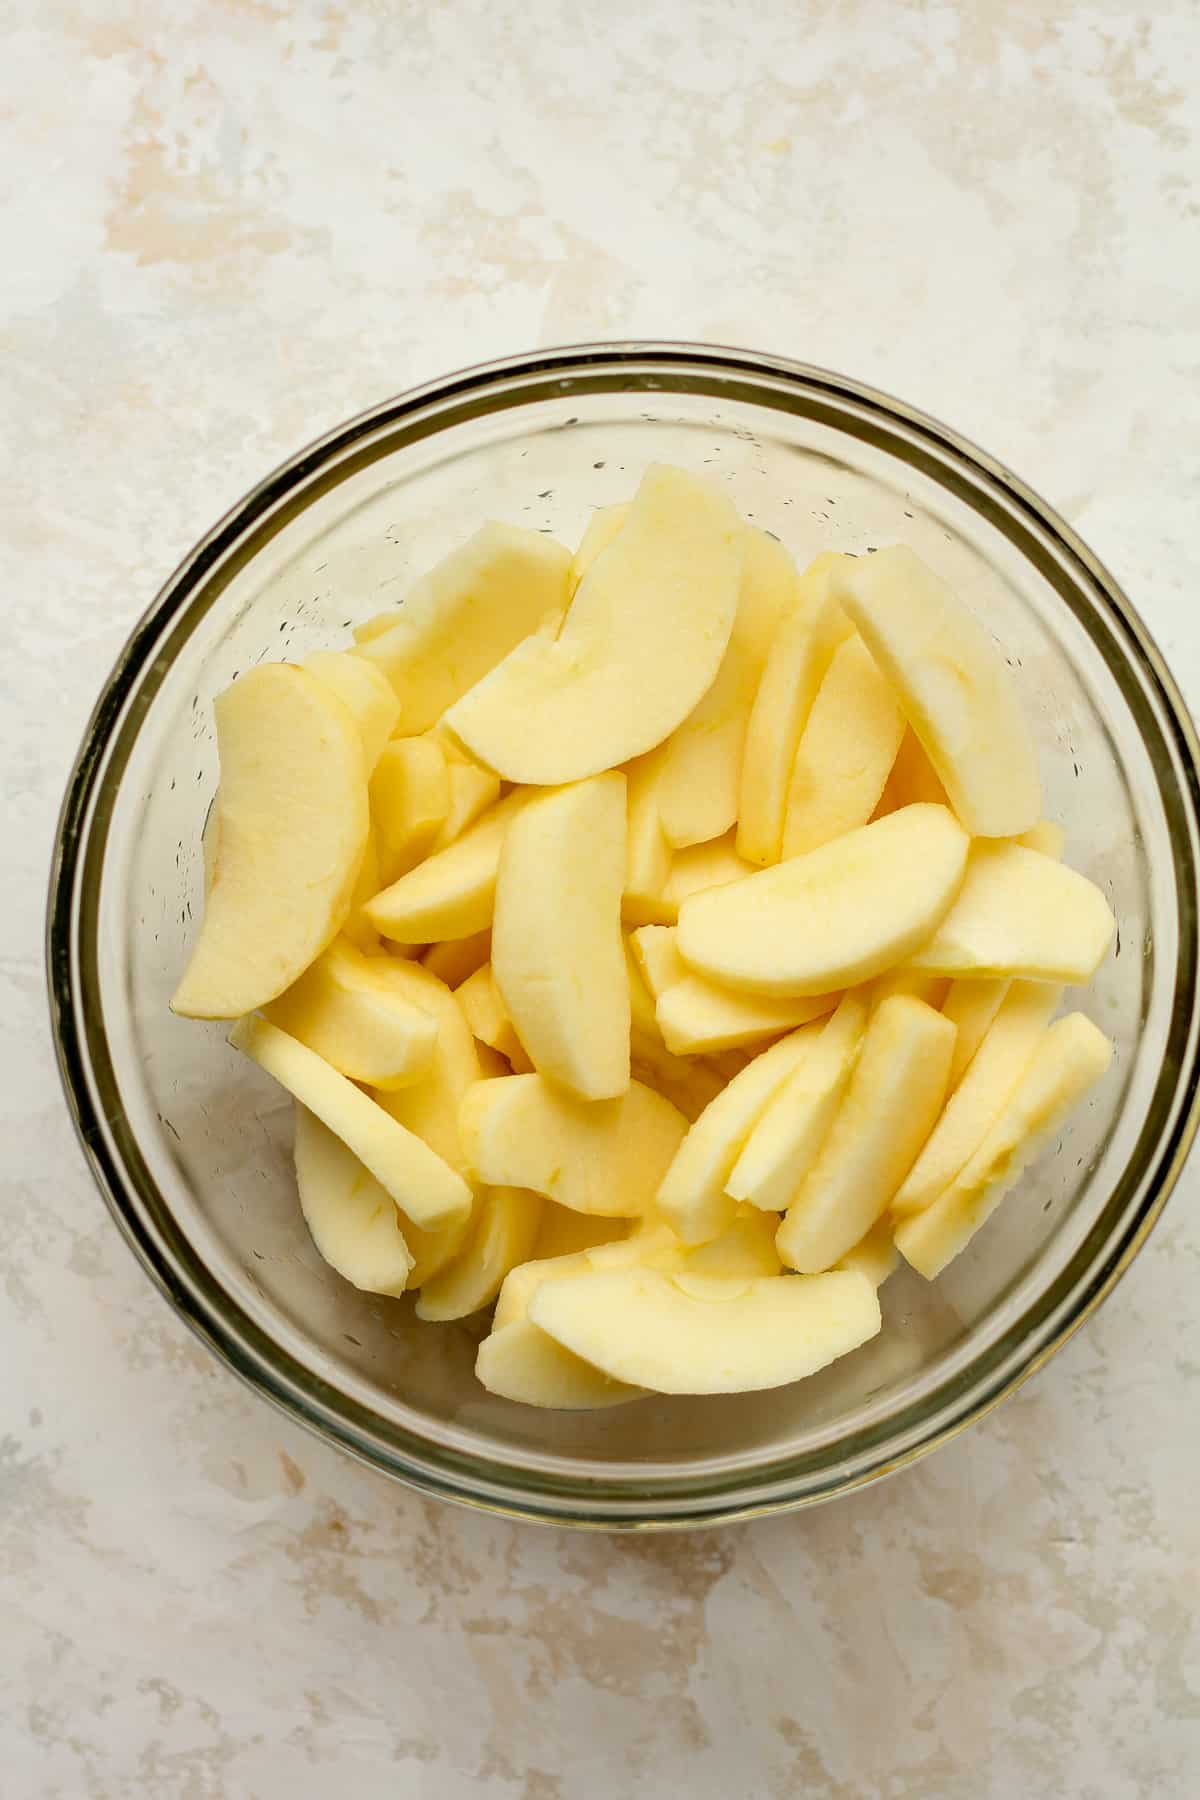 A bowl of sliced apples.